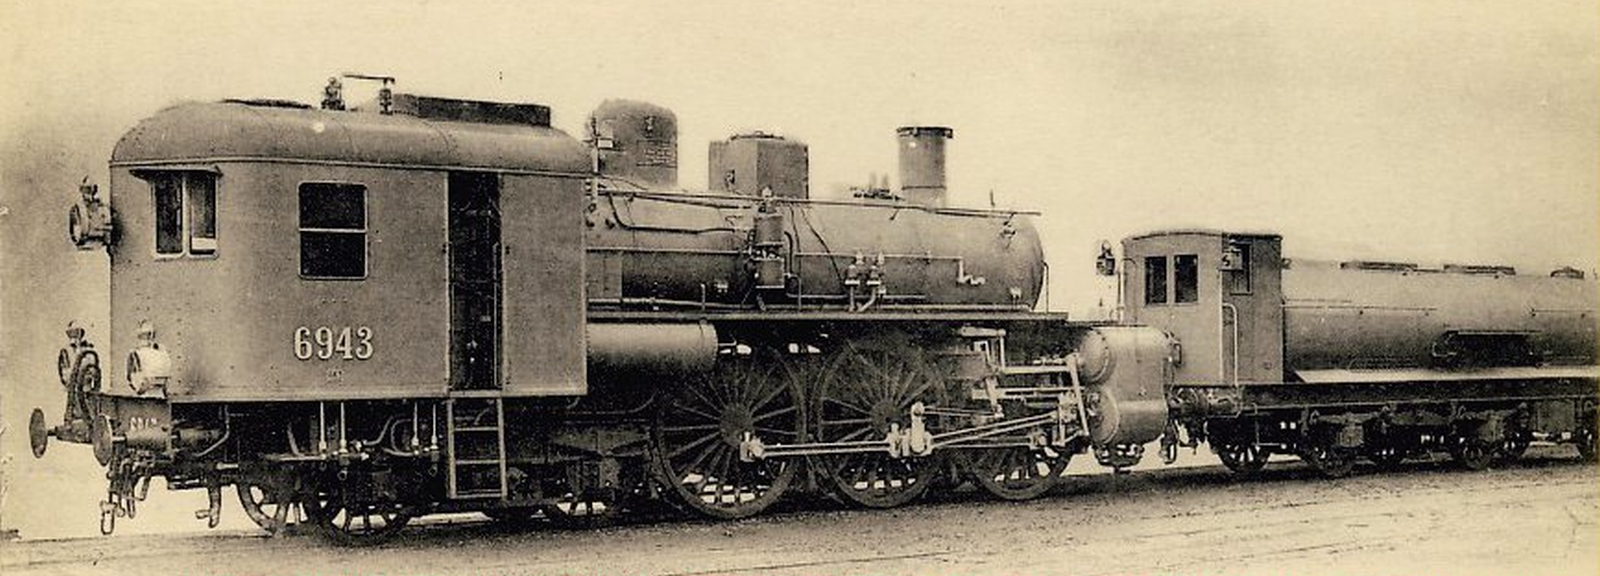 No. 6943 on an old postcard